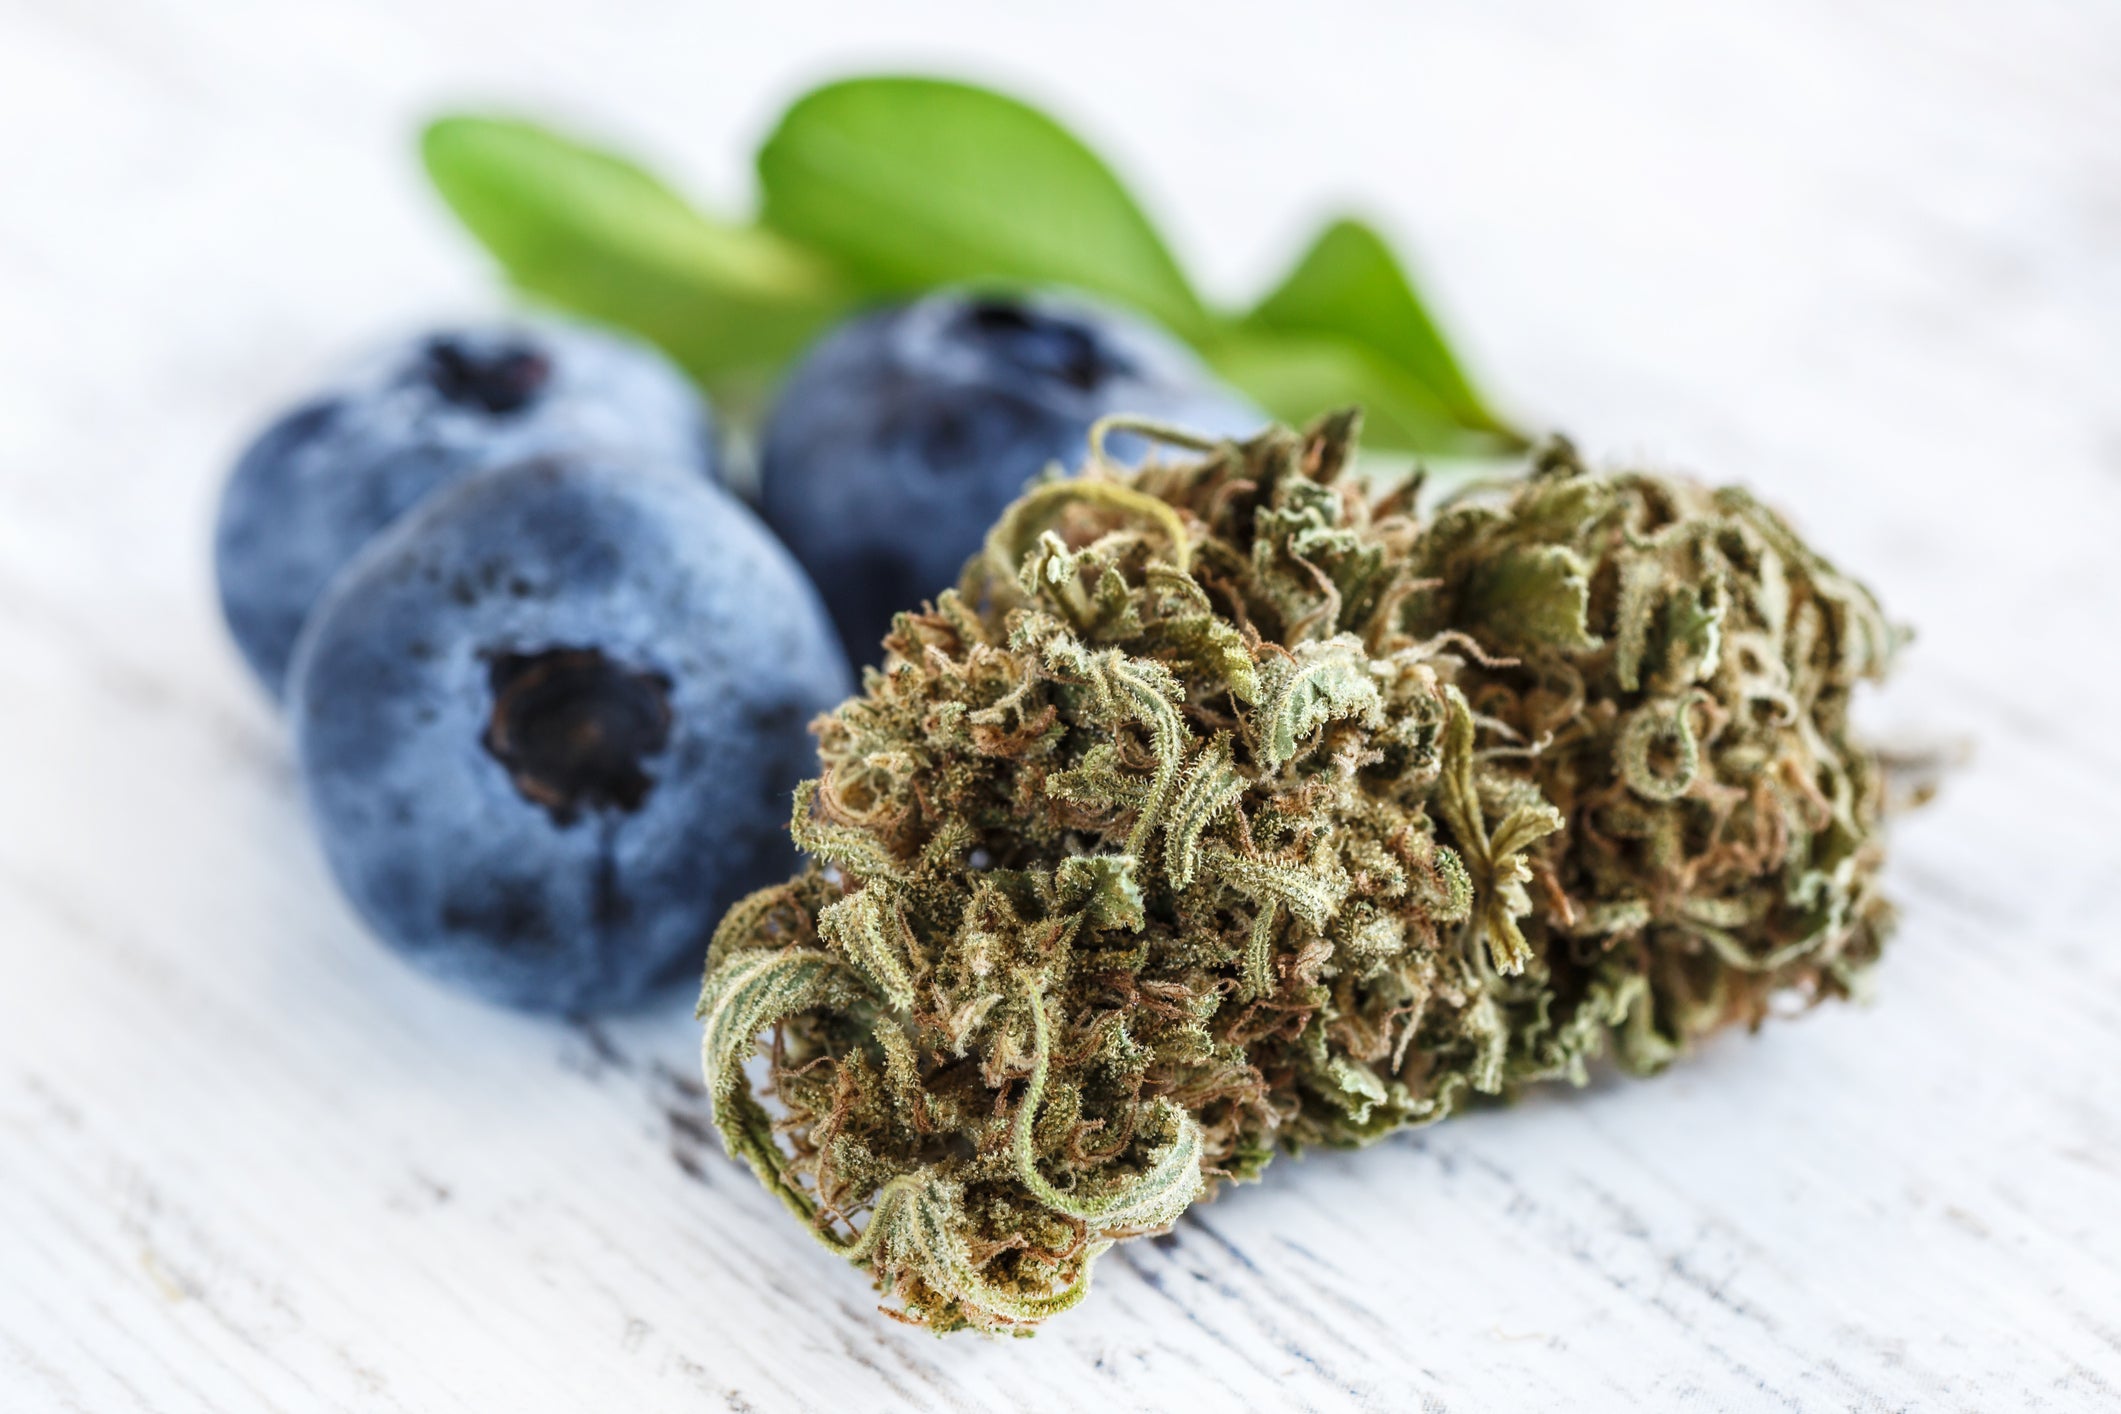 A cannabis flower nug from the blue razz slushie strain lies next to three blueberries which have similar terpenes